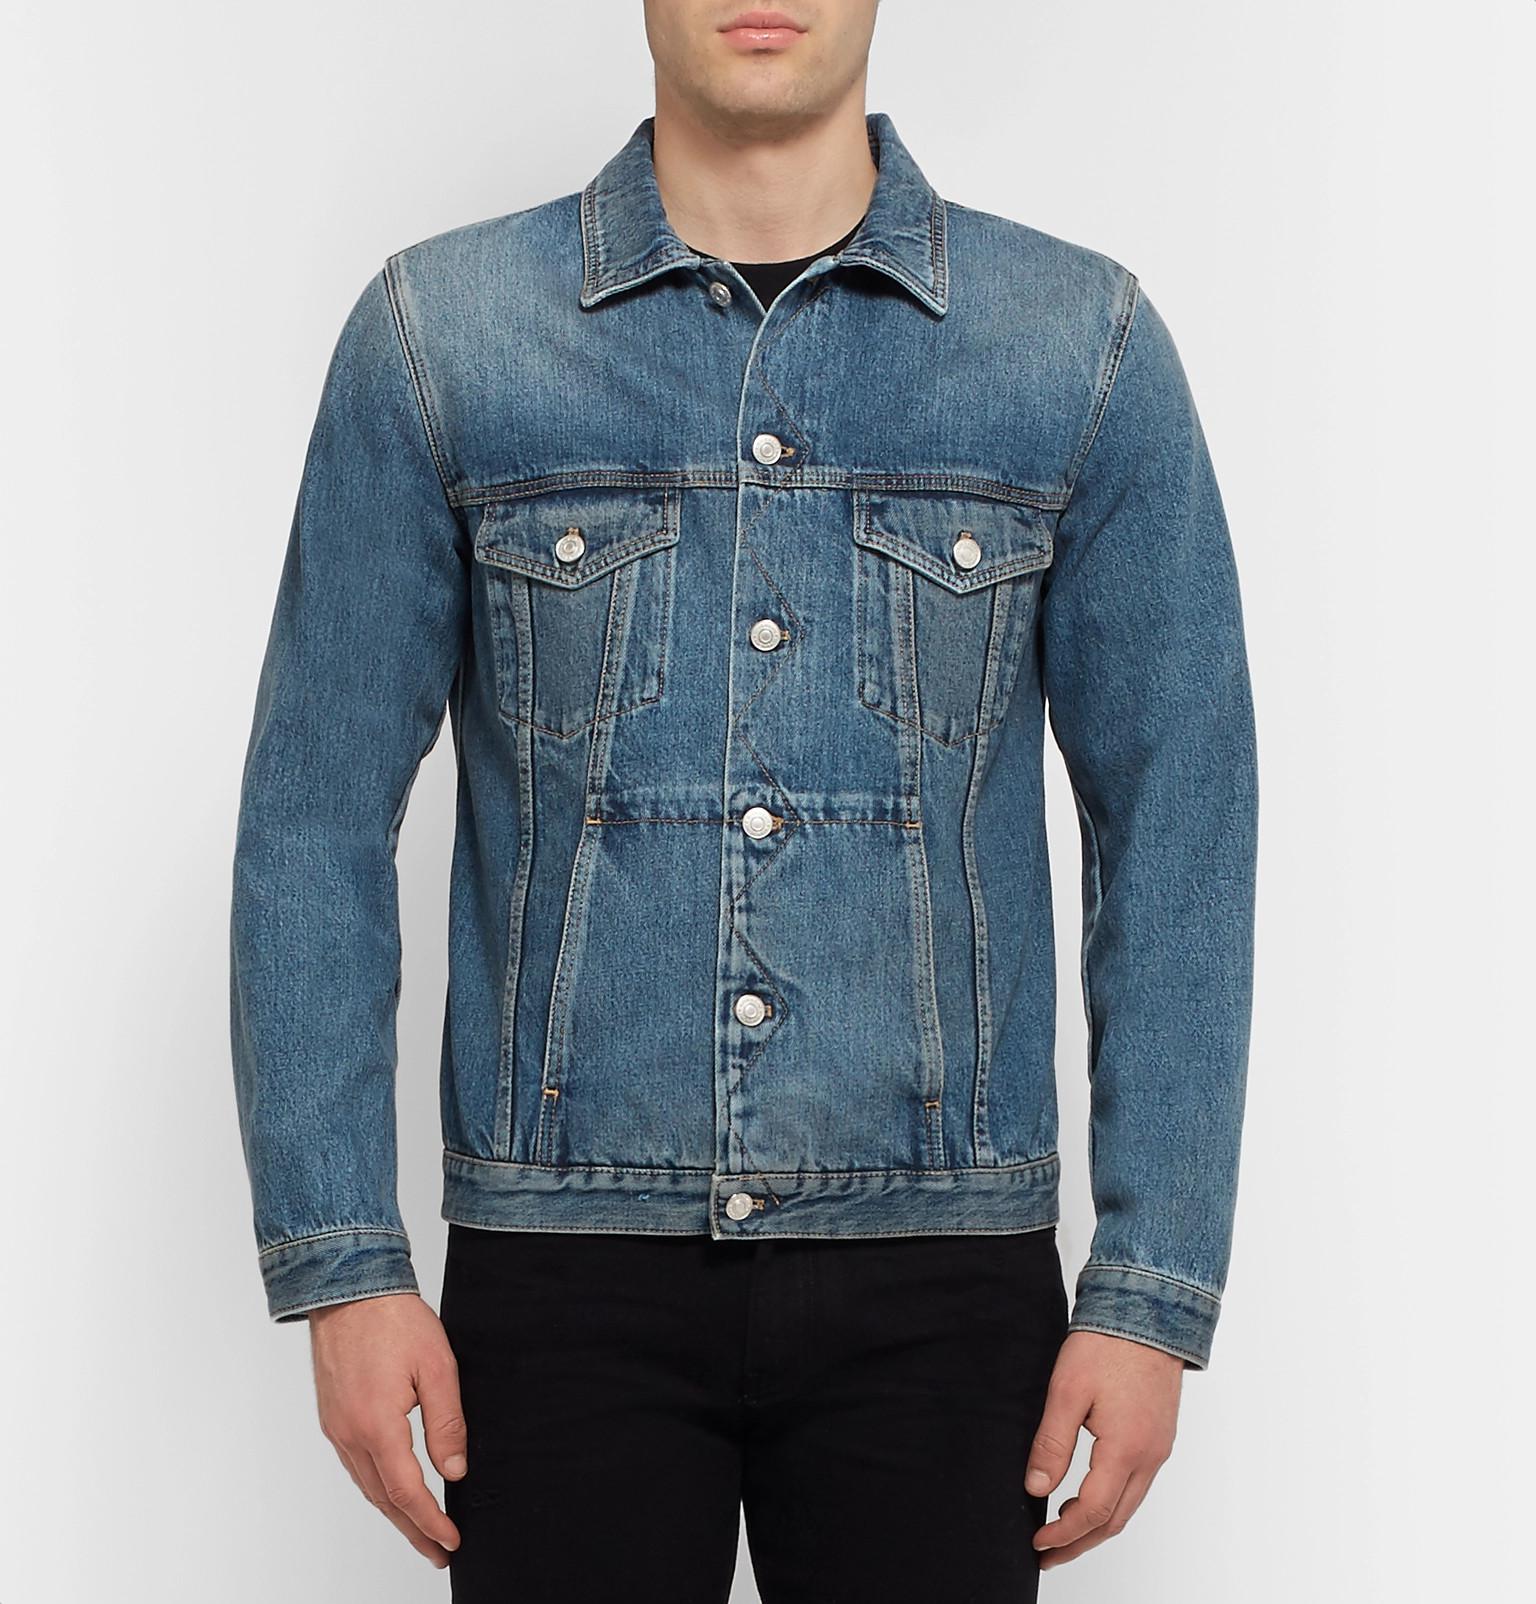 Givenchy Logo-embroidered Distressed Denim Jacket in Blue for Men - Lyst